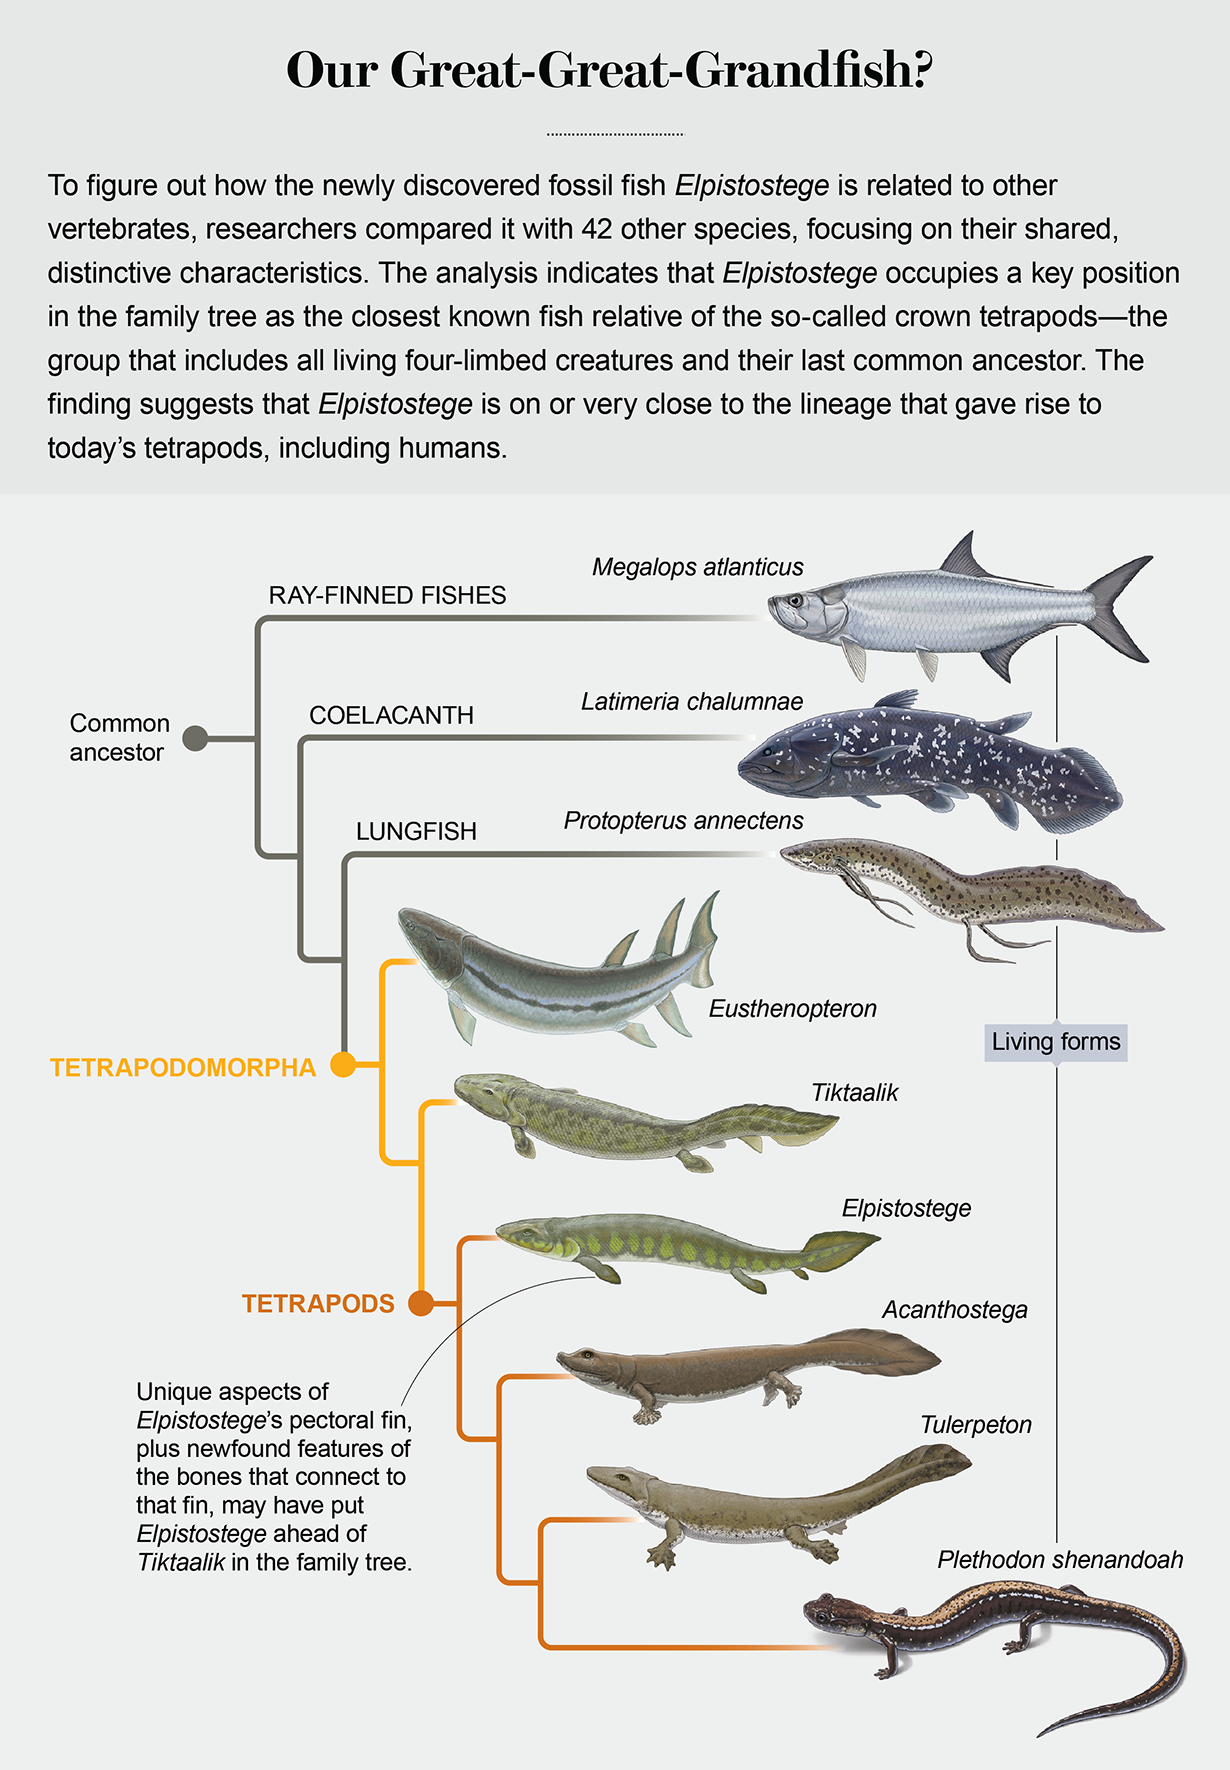 Illustration shows that Elpistostege may occupy a key spot in the evolutionary lineage of vertebrates that gave rise to modern tetrapods